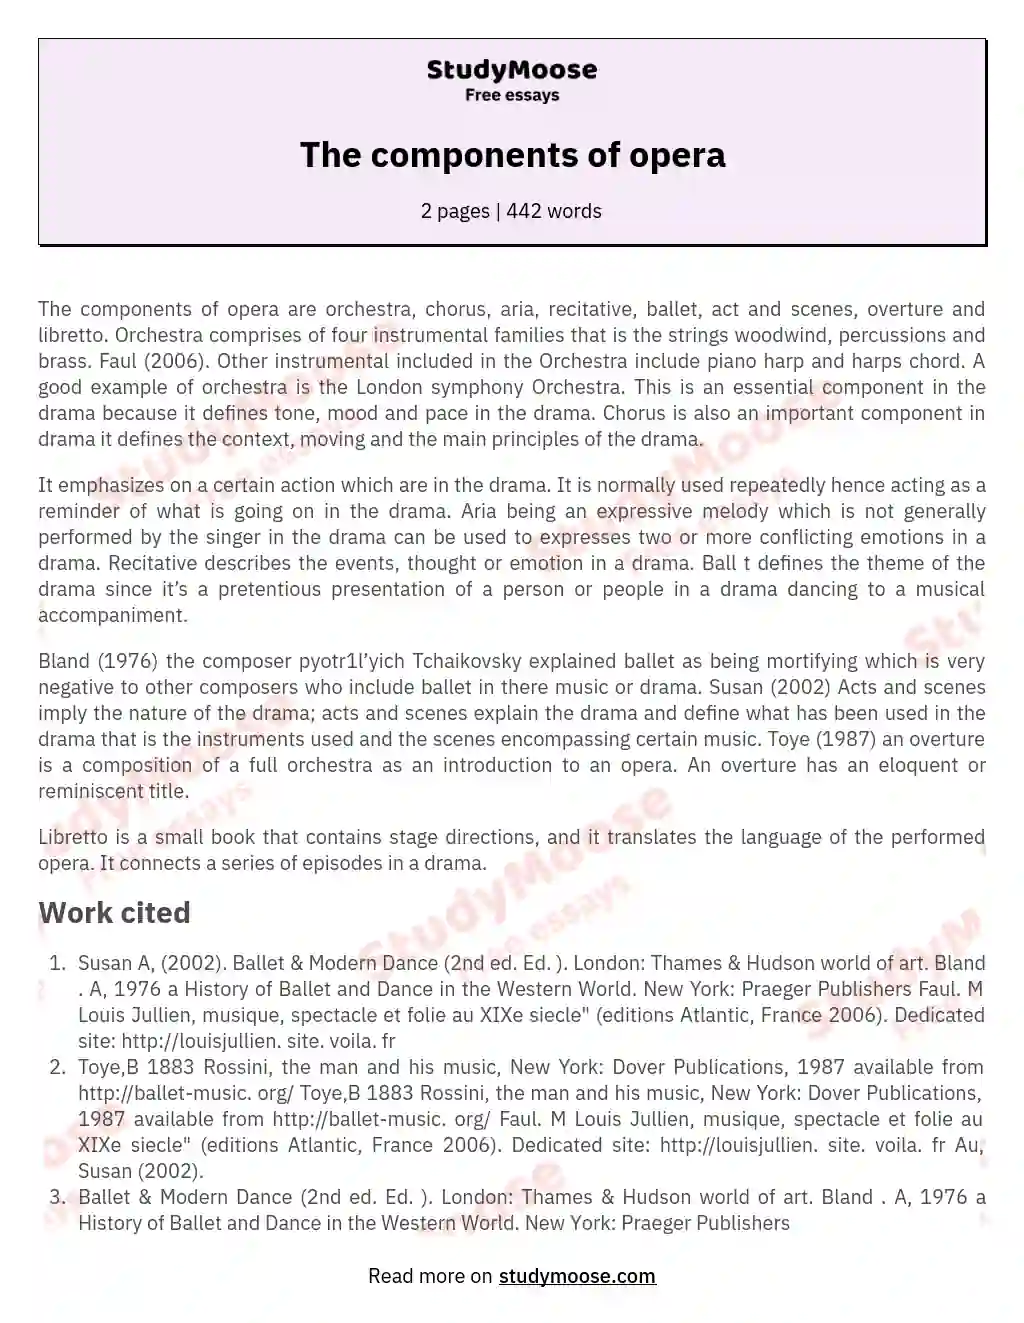 The components of opera essay